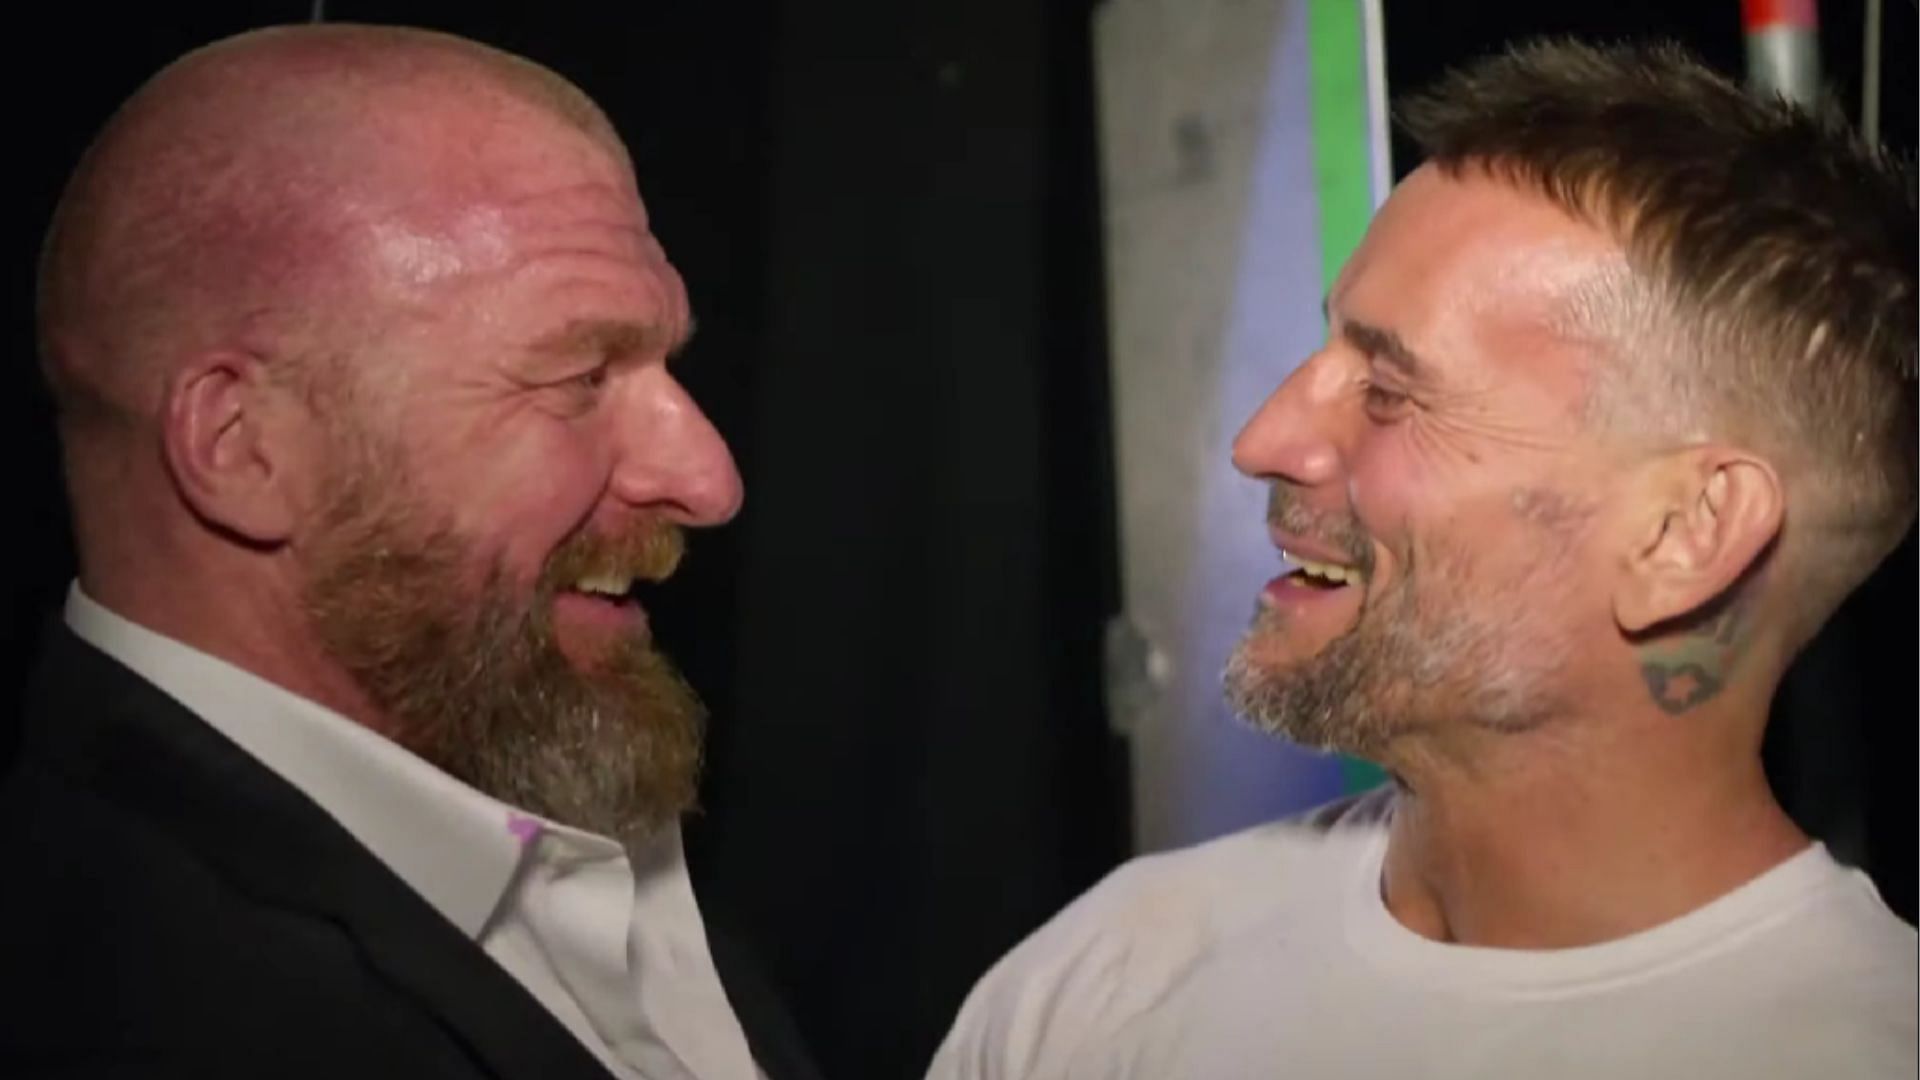 Triple H backstage with CM Punk [Image credits: WWE